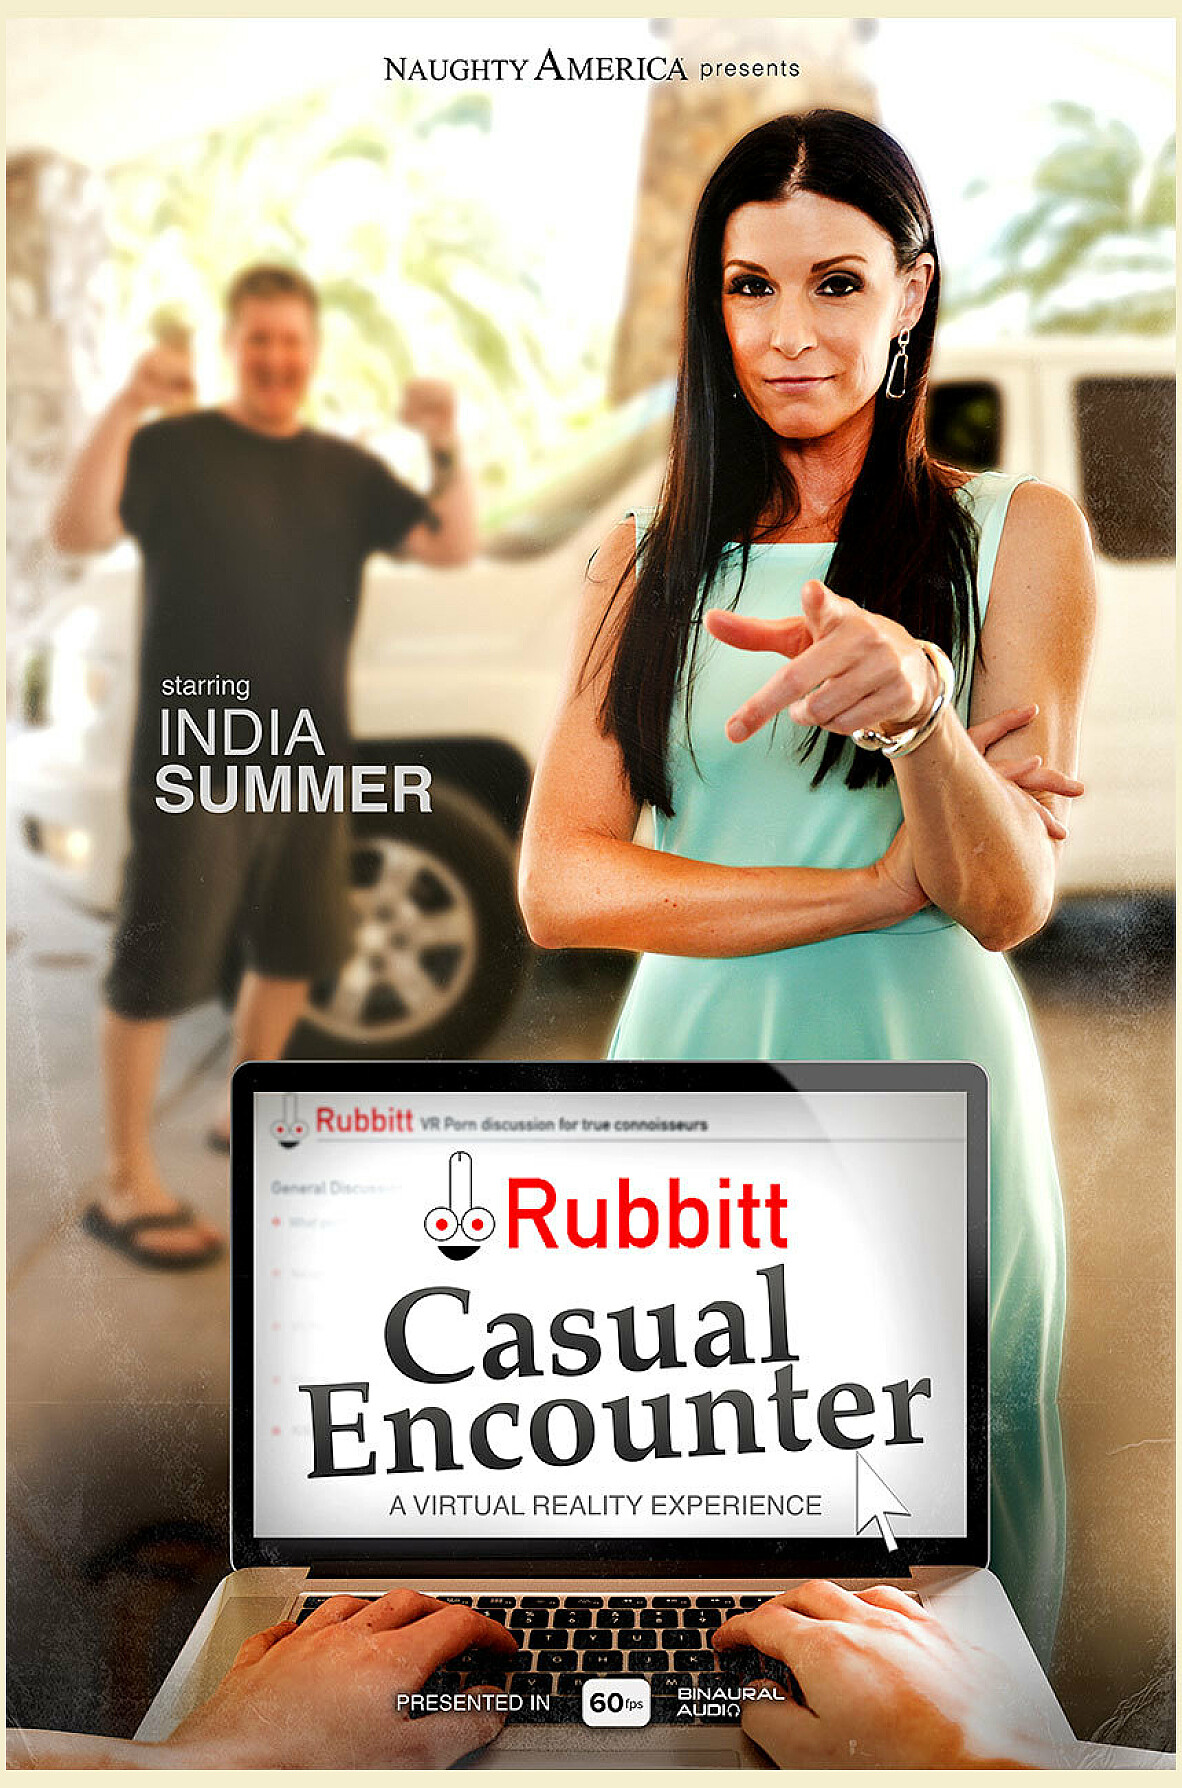 Watch India Summer and Tony DeSergio VR video in Naughty America